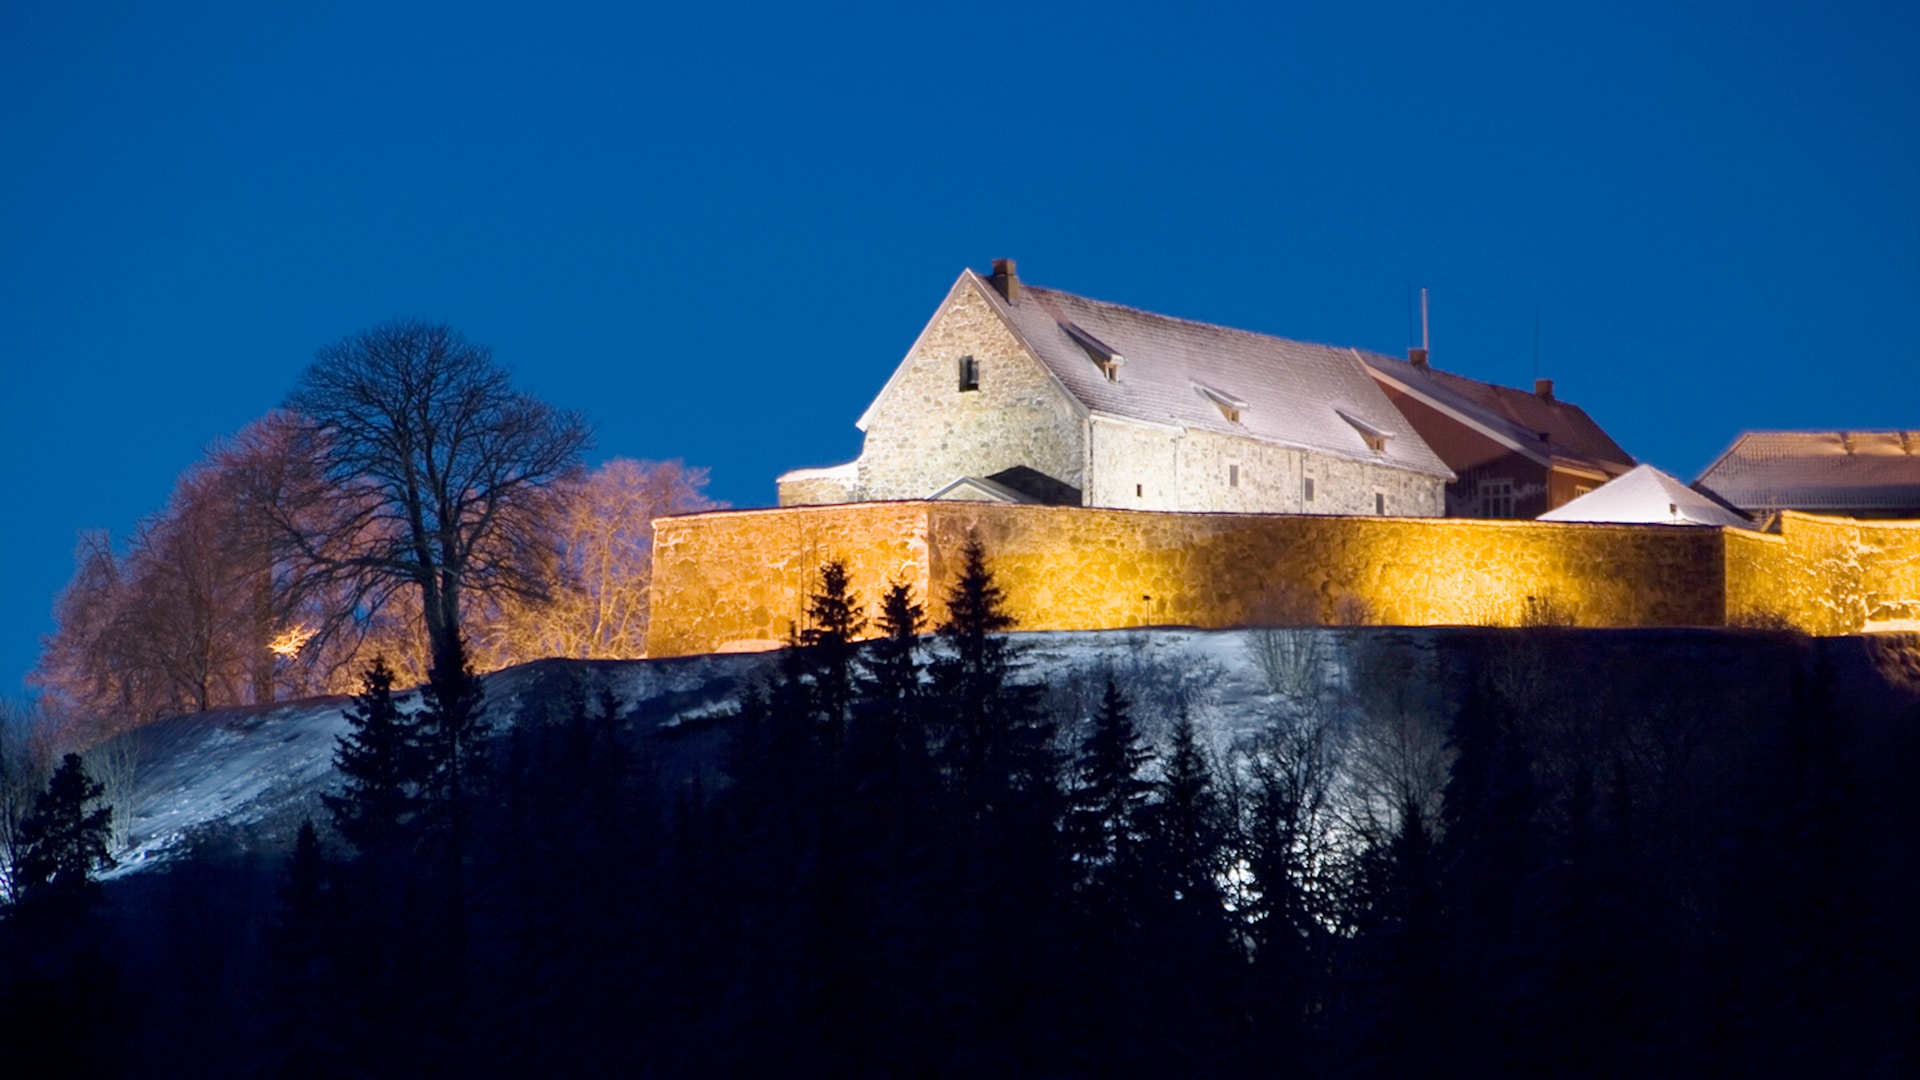 The stone buildings at fortress of Kongsvinger lit up at night.